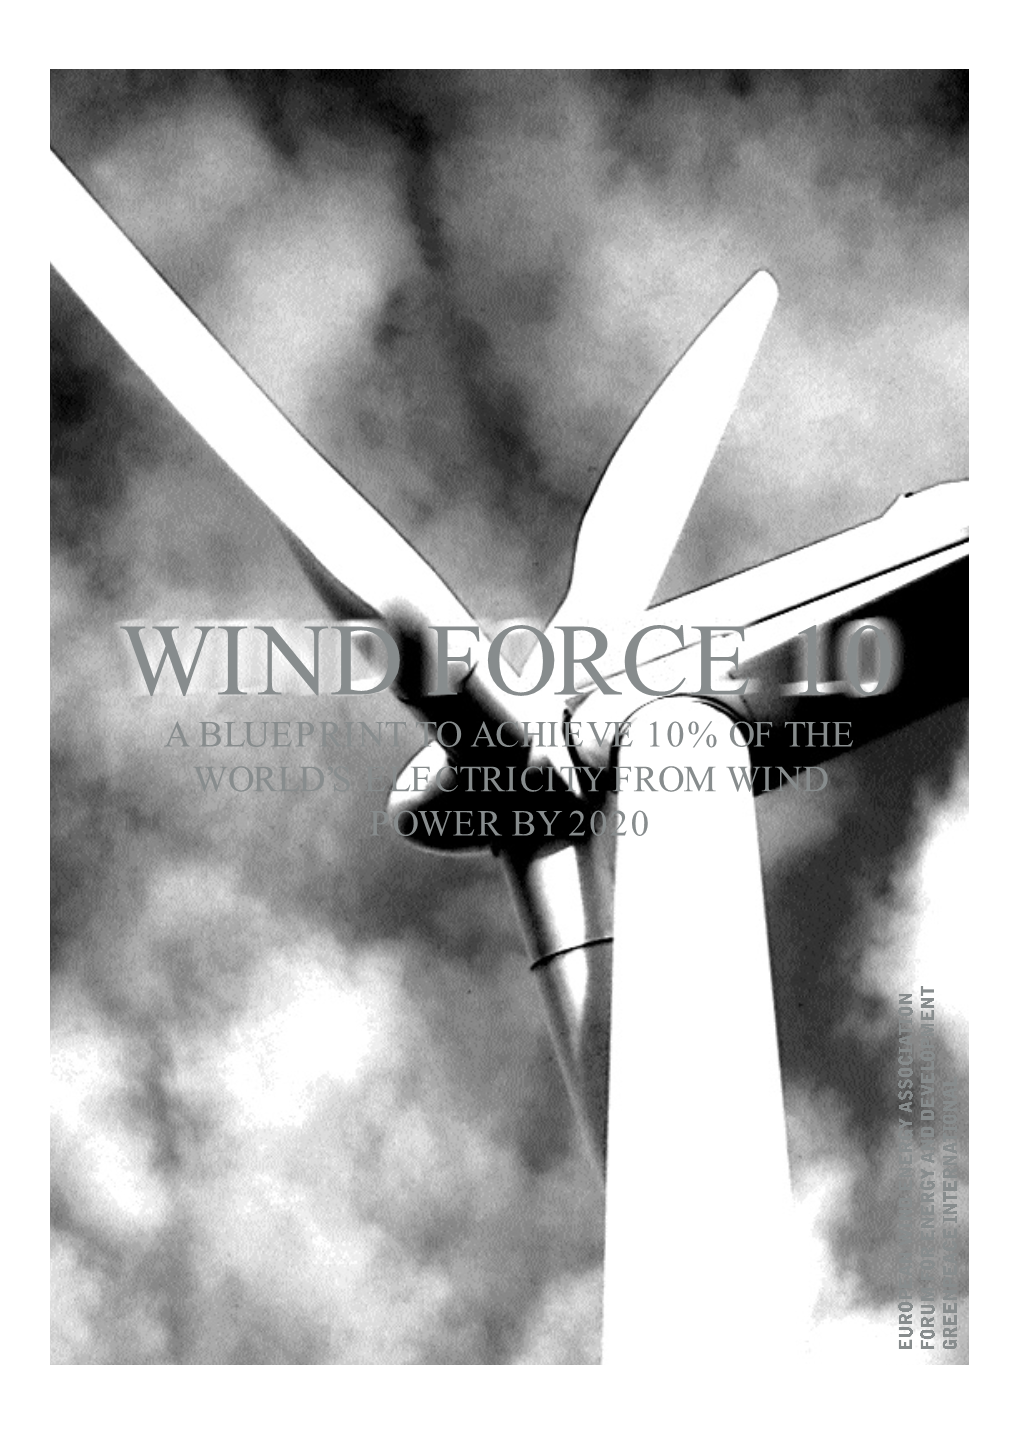 Wind Force 10